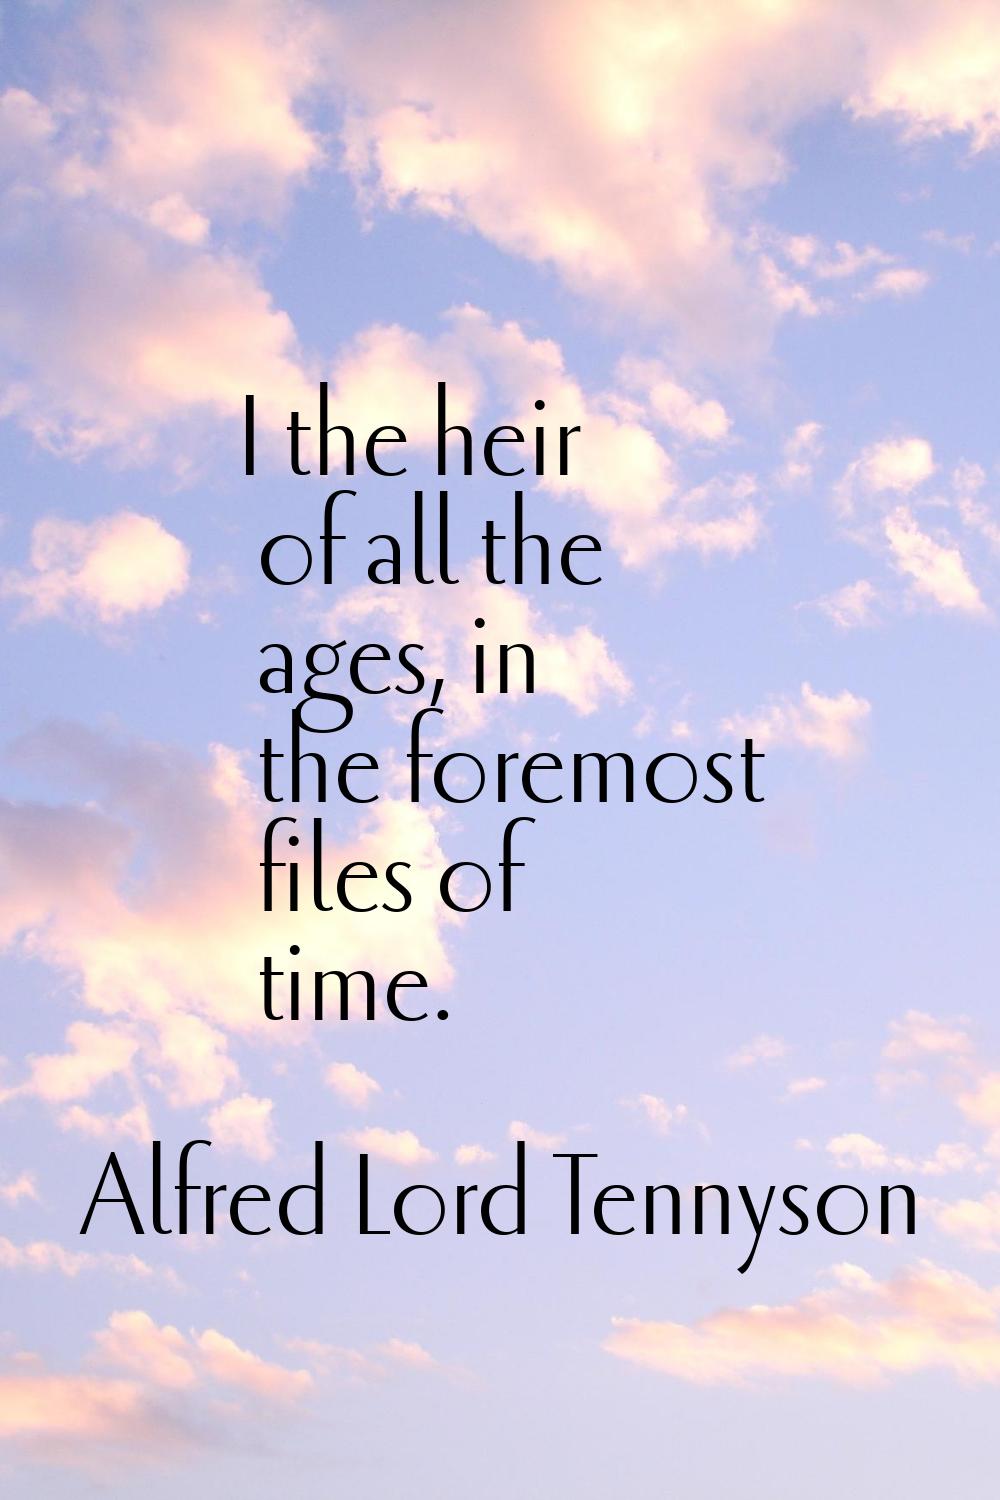 I the heir of all the ages, in the foremost files of time.